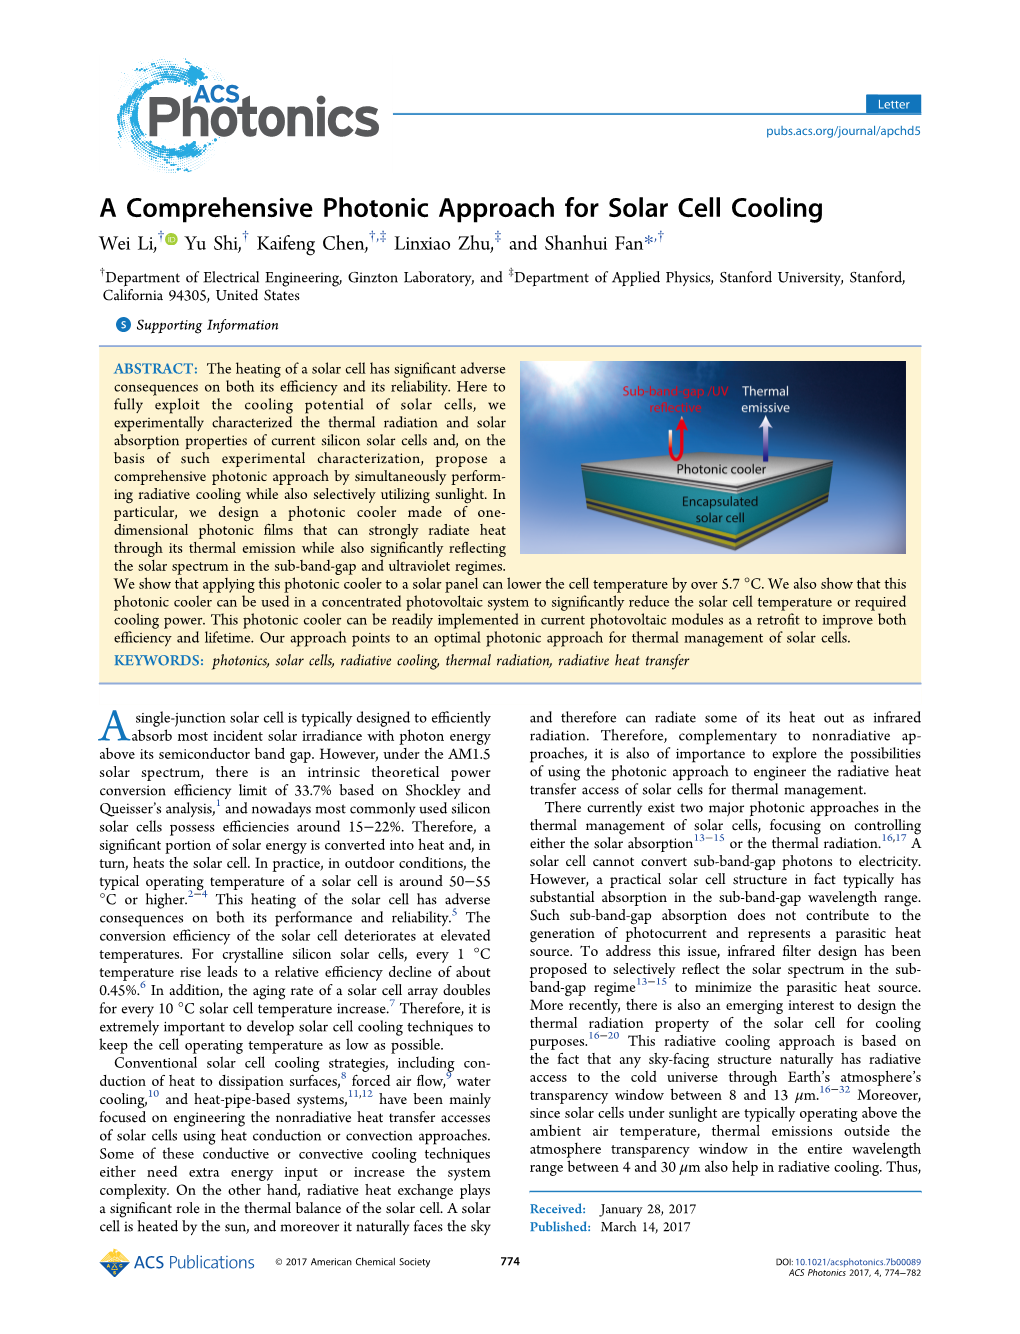 A Comprehensive Photonic Approach for Solar Cell Cooling